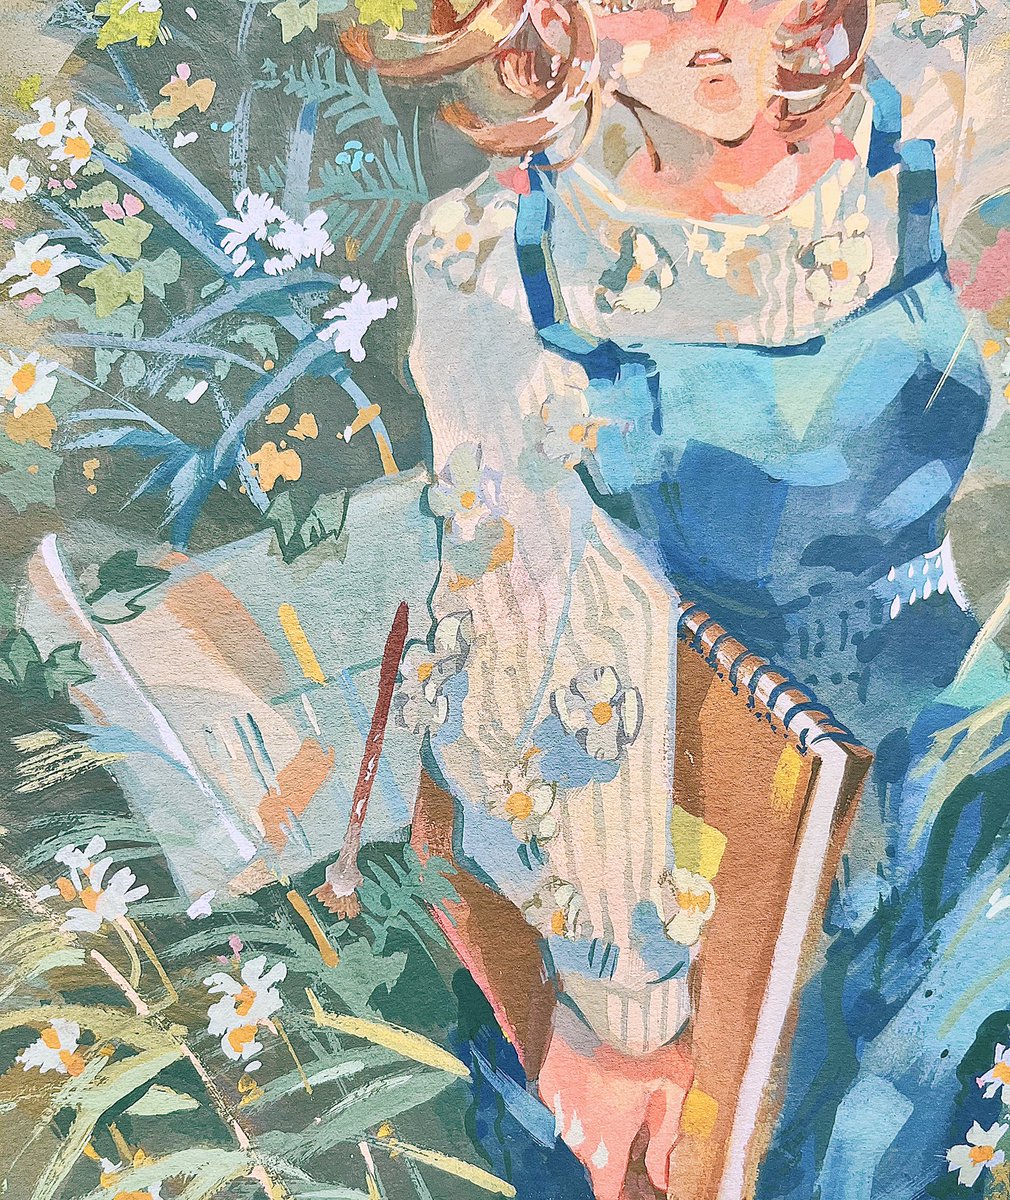 「WIP baby daisies  」|Kil @ NEW ZINE RELEASE 💪🎊のイラスト